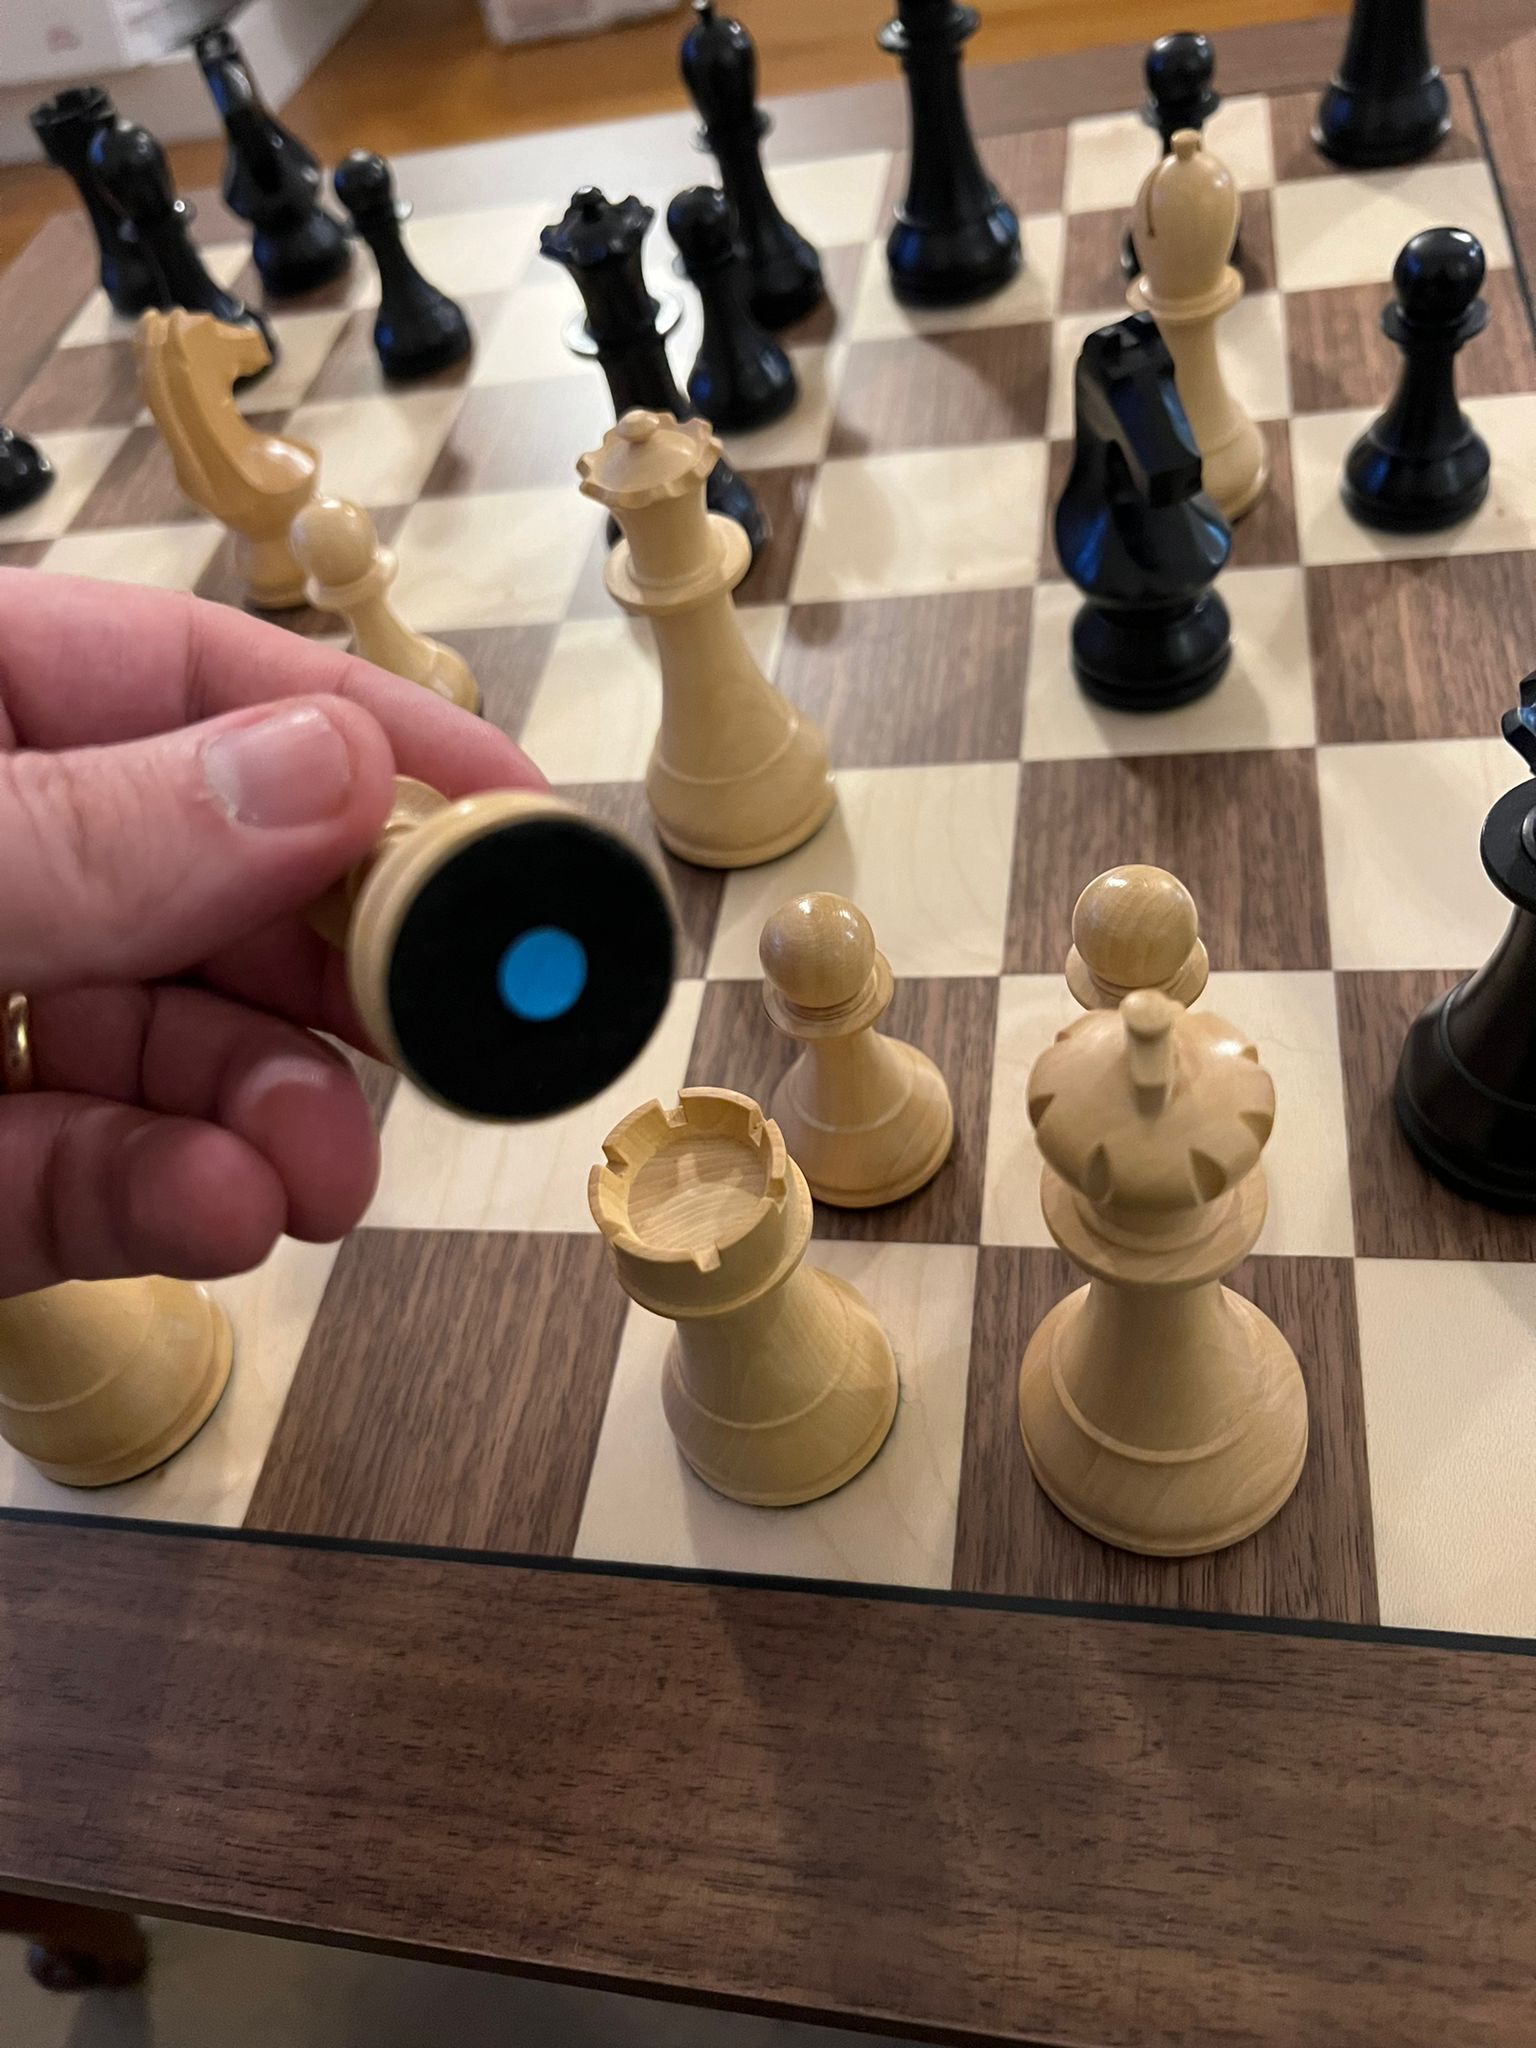 GoChess: Smart Chessboard - The Future Of Kings' Game